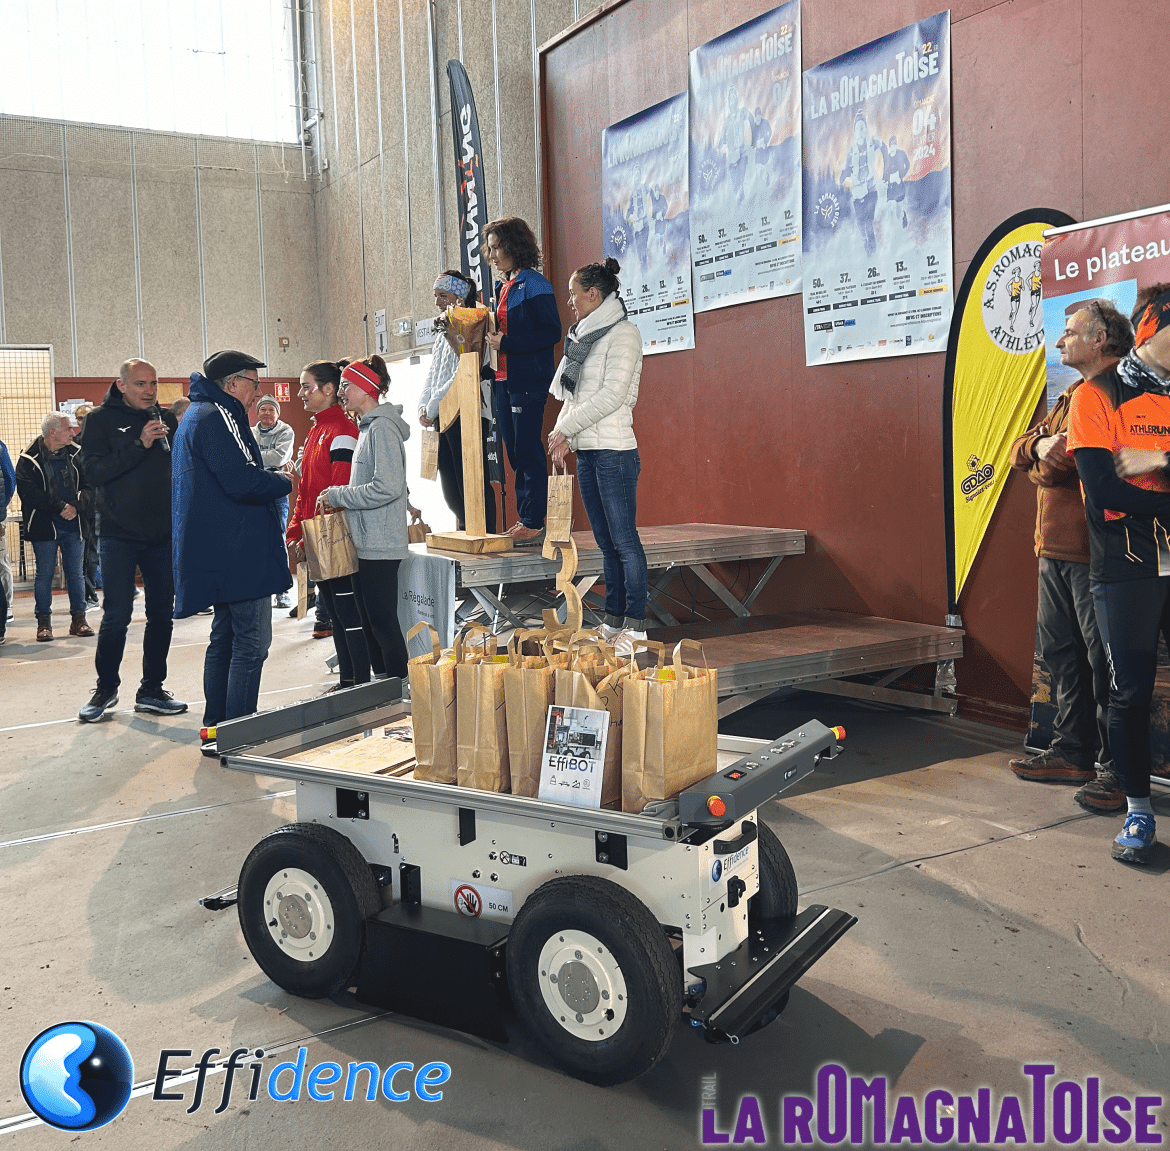 Effidence was a sponsor and participant in the Romagnatoise! EffiBOT, a load-carrying robot, was in charge of the prize-giving ceremony!